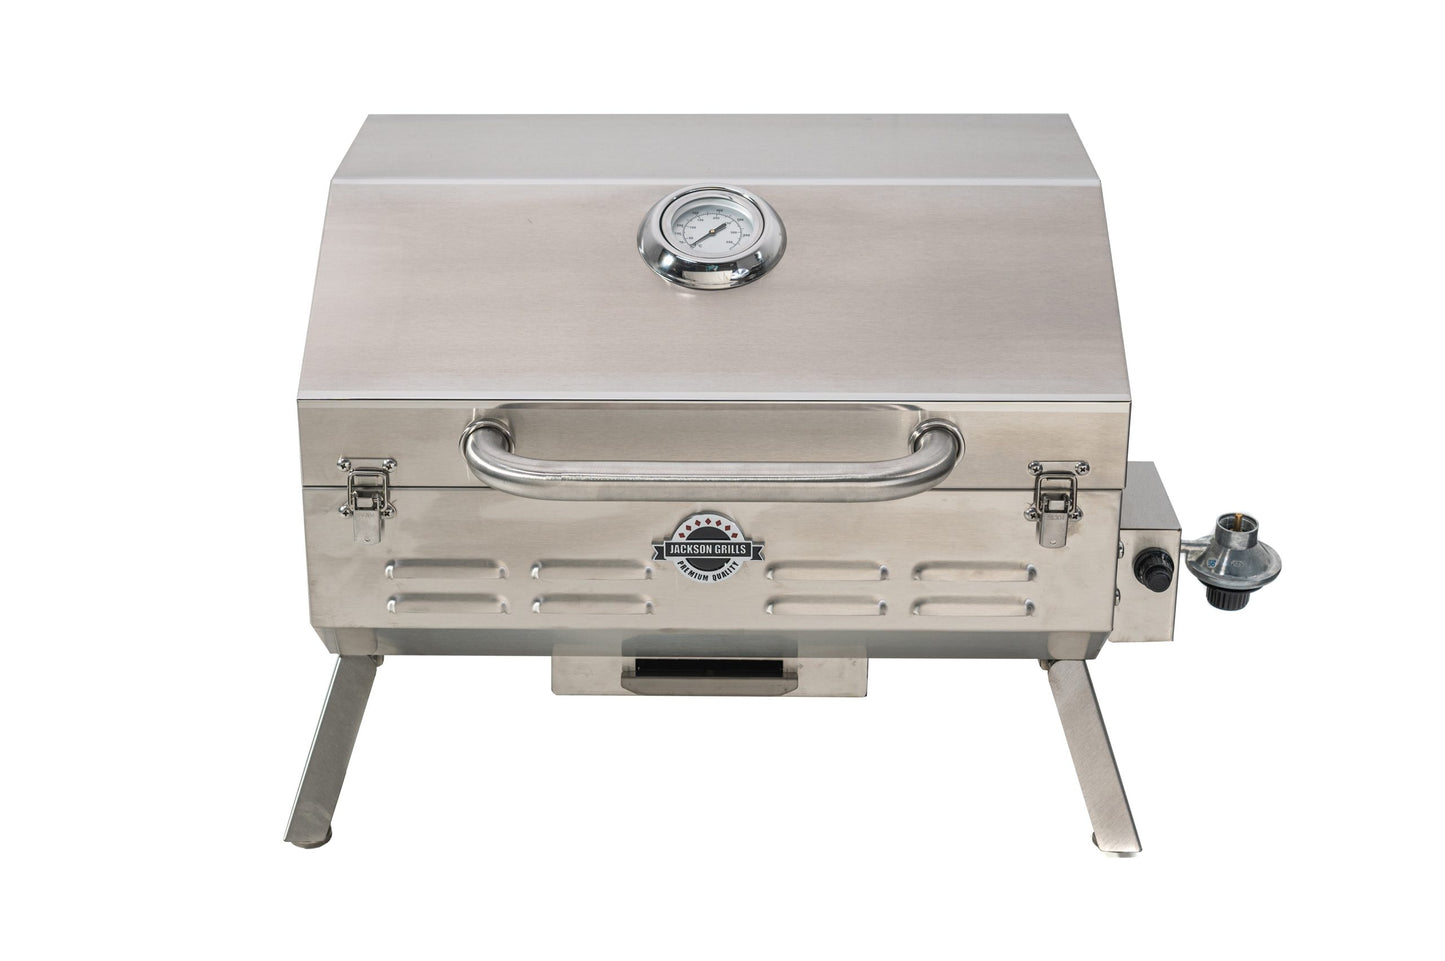 Jackson Grills Versa 100 Portable Stainless Steel Gas Grill